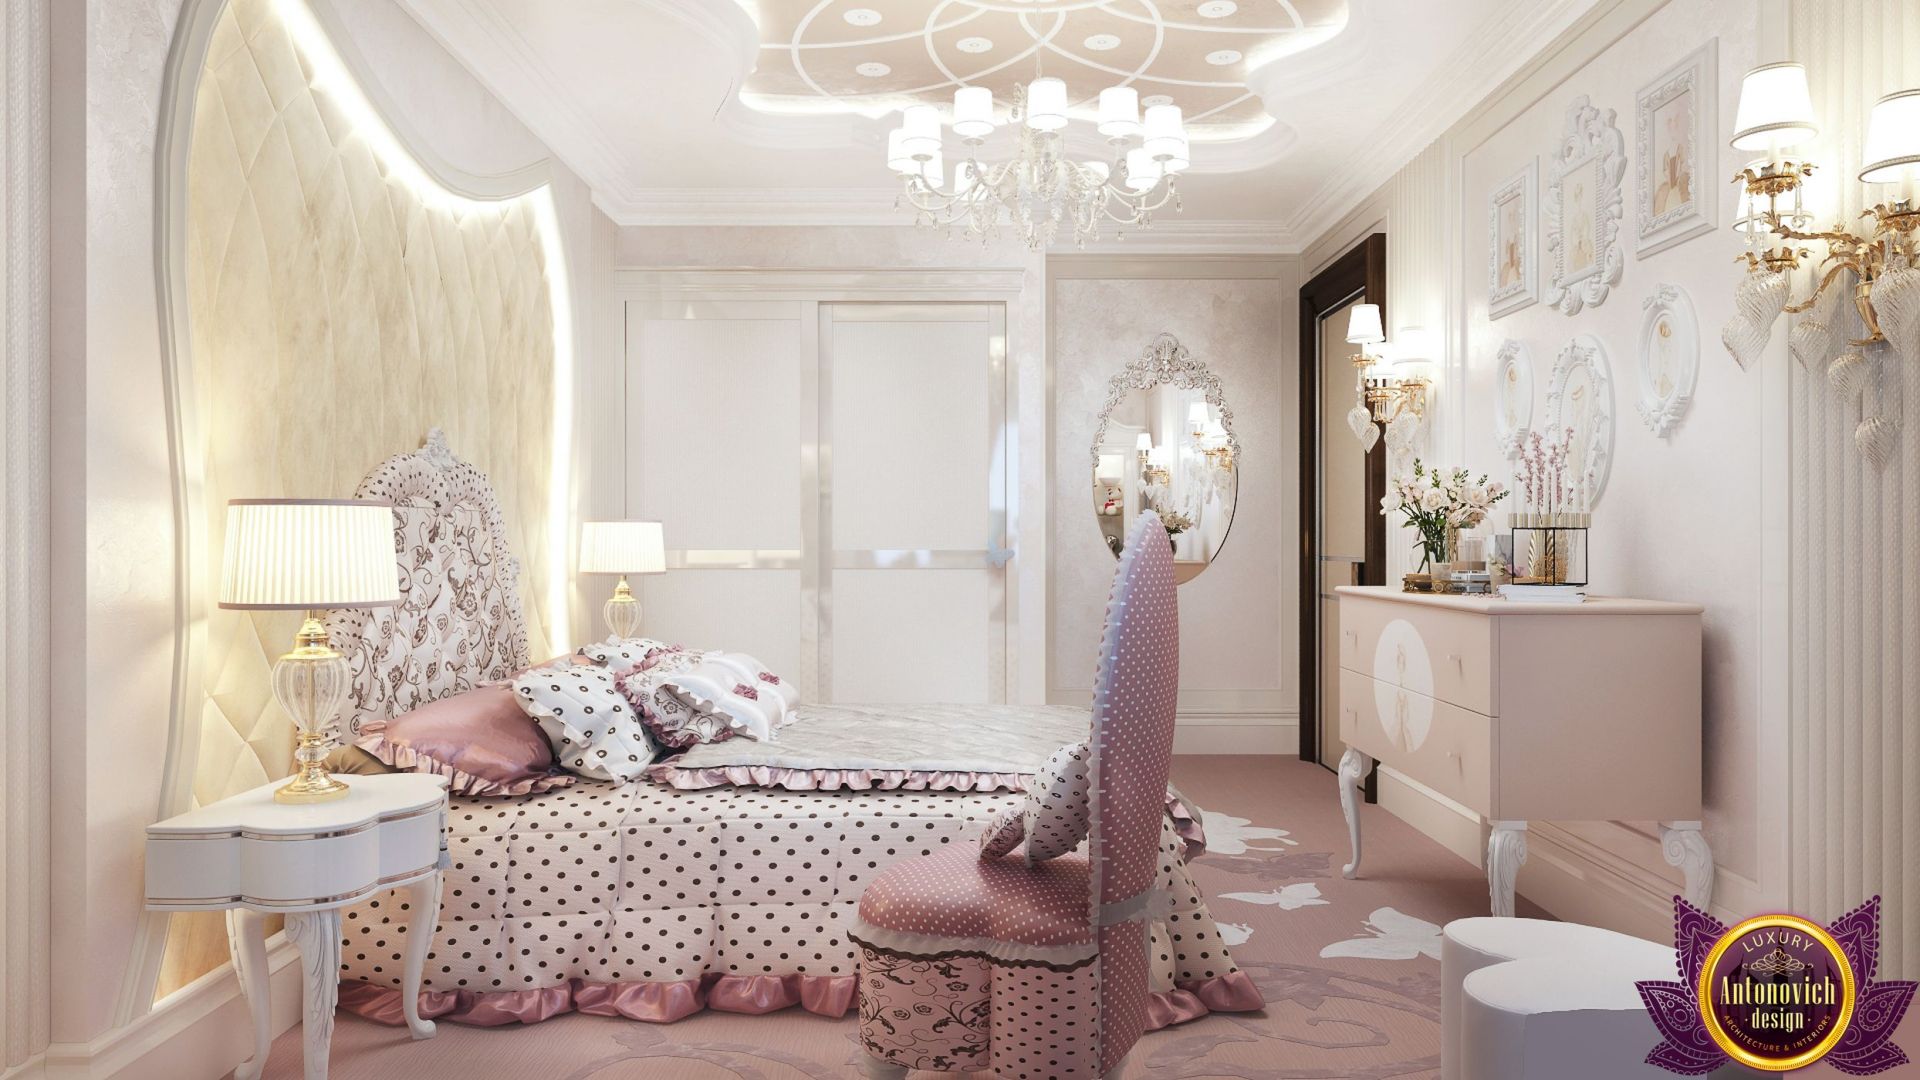 Luxury Girls Bedroom Design: Create a Dream Space for Your Princess